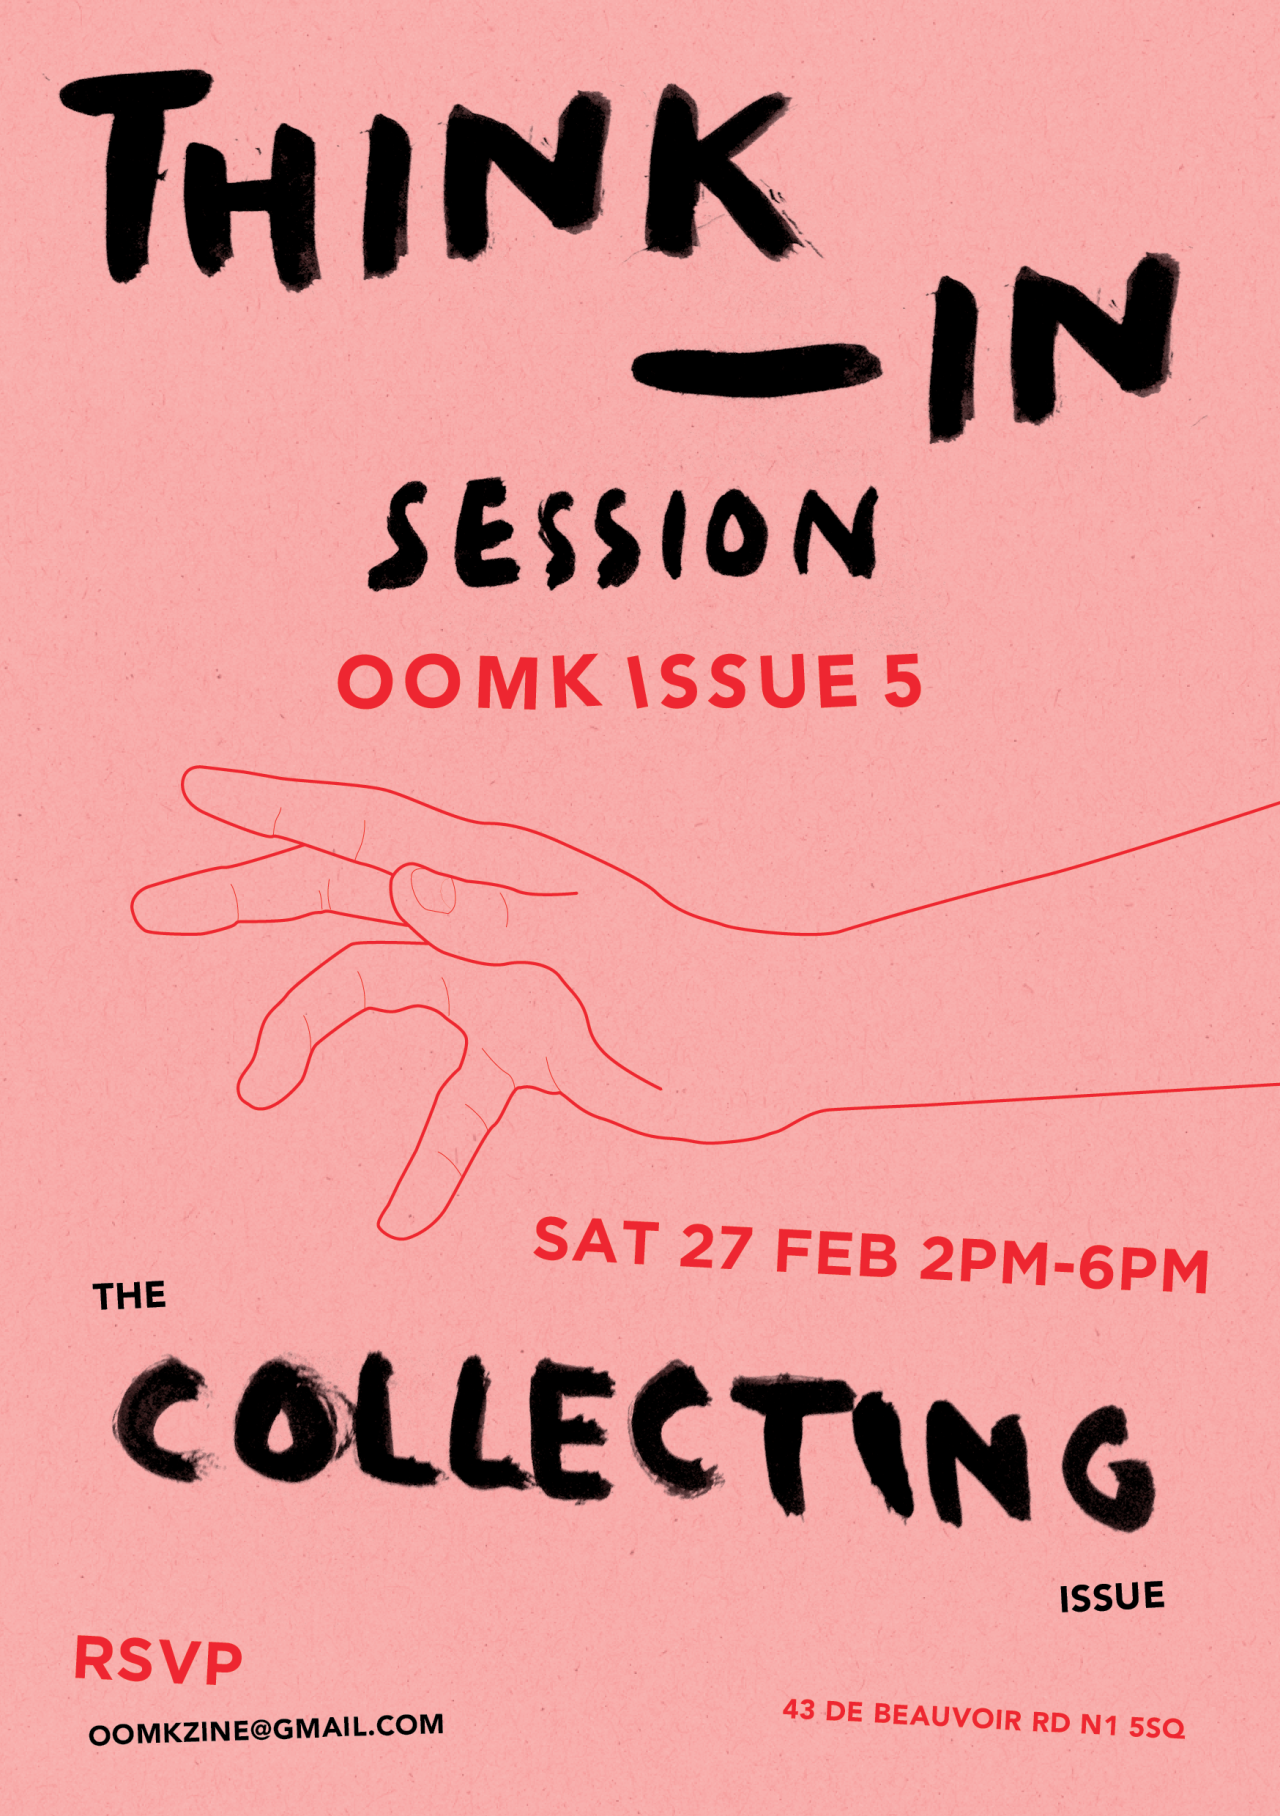 The OOMK Issue 5 Think-in is on Saturday 27th Feb 2-6pm at Open School East, come and plan the next issue with us! Open to all women. RSVP:https://www.eventbrite.co.uk/e/oomk-5-think-in-tickets-21775629494 WHEN Saturday, 27 February 2016 from 14:00...